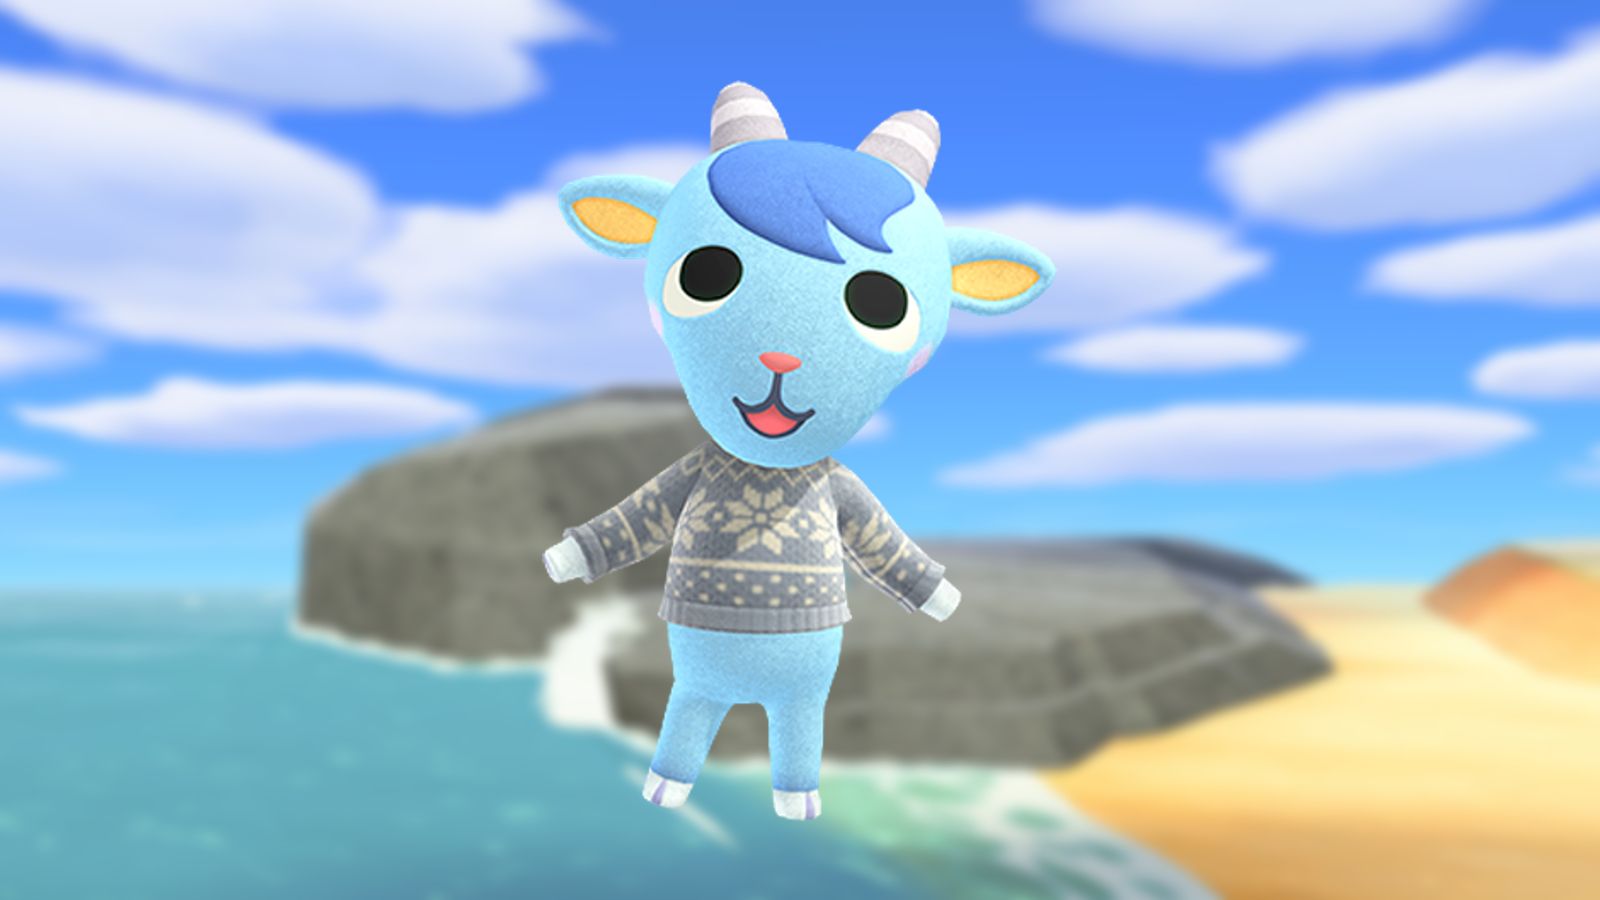 Sherb was added to Animal Crossing New Horizons at its release.